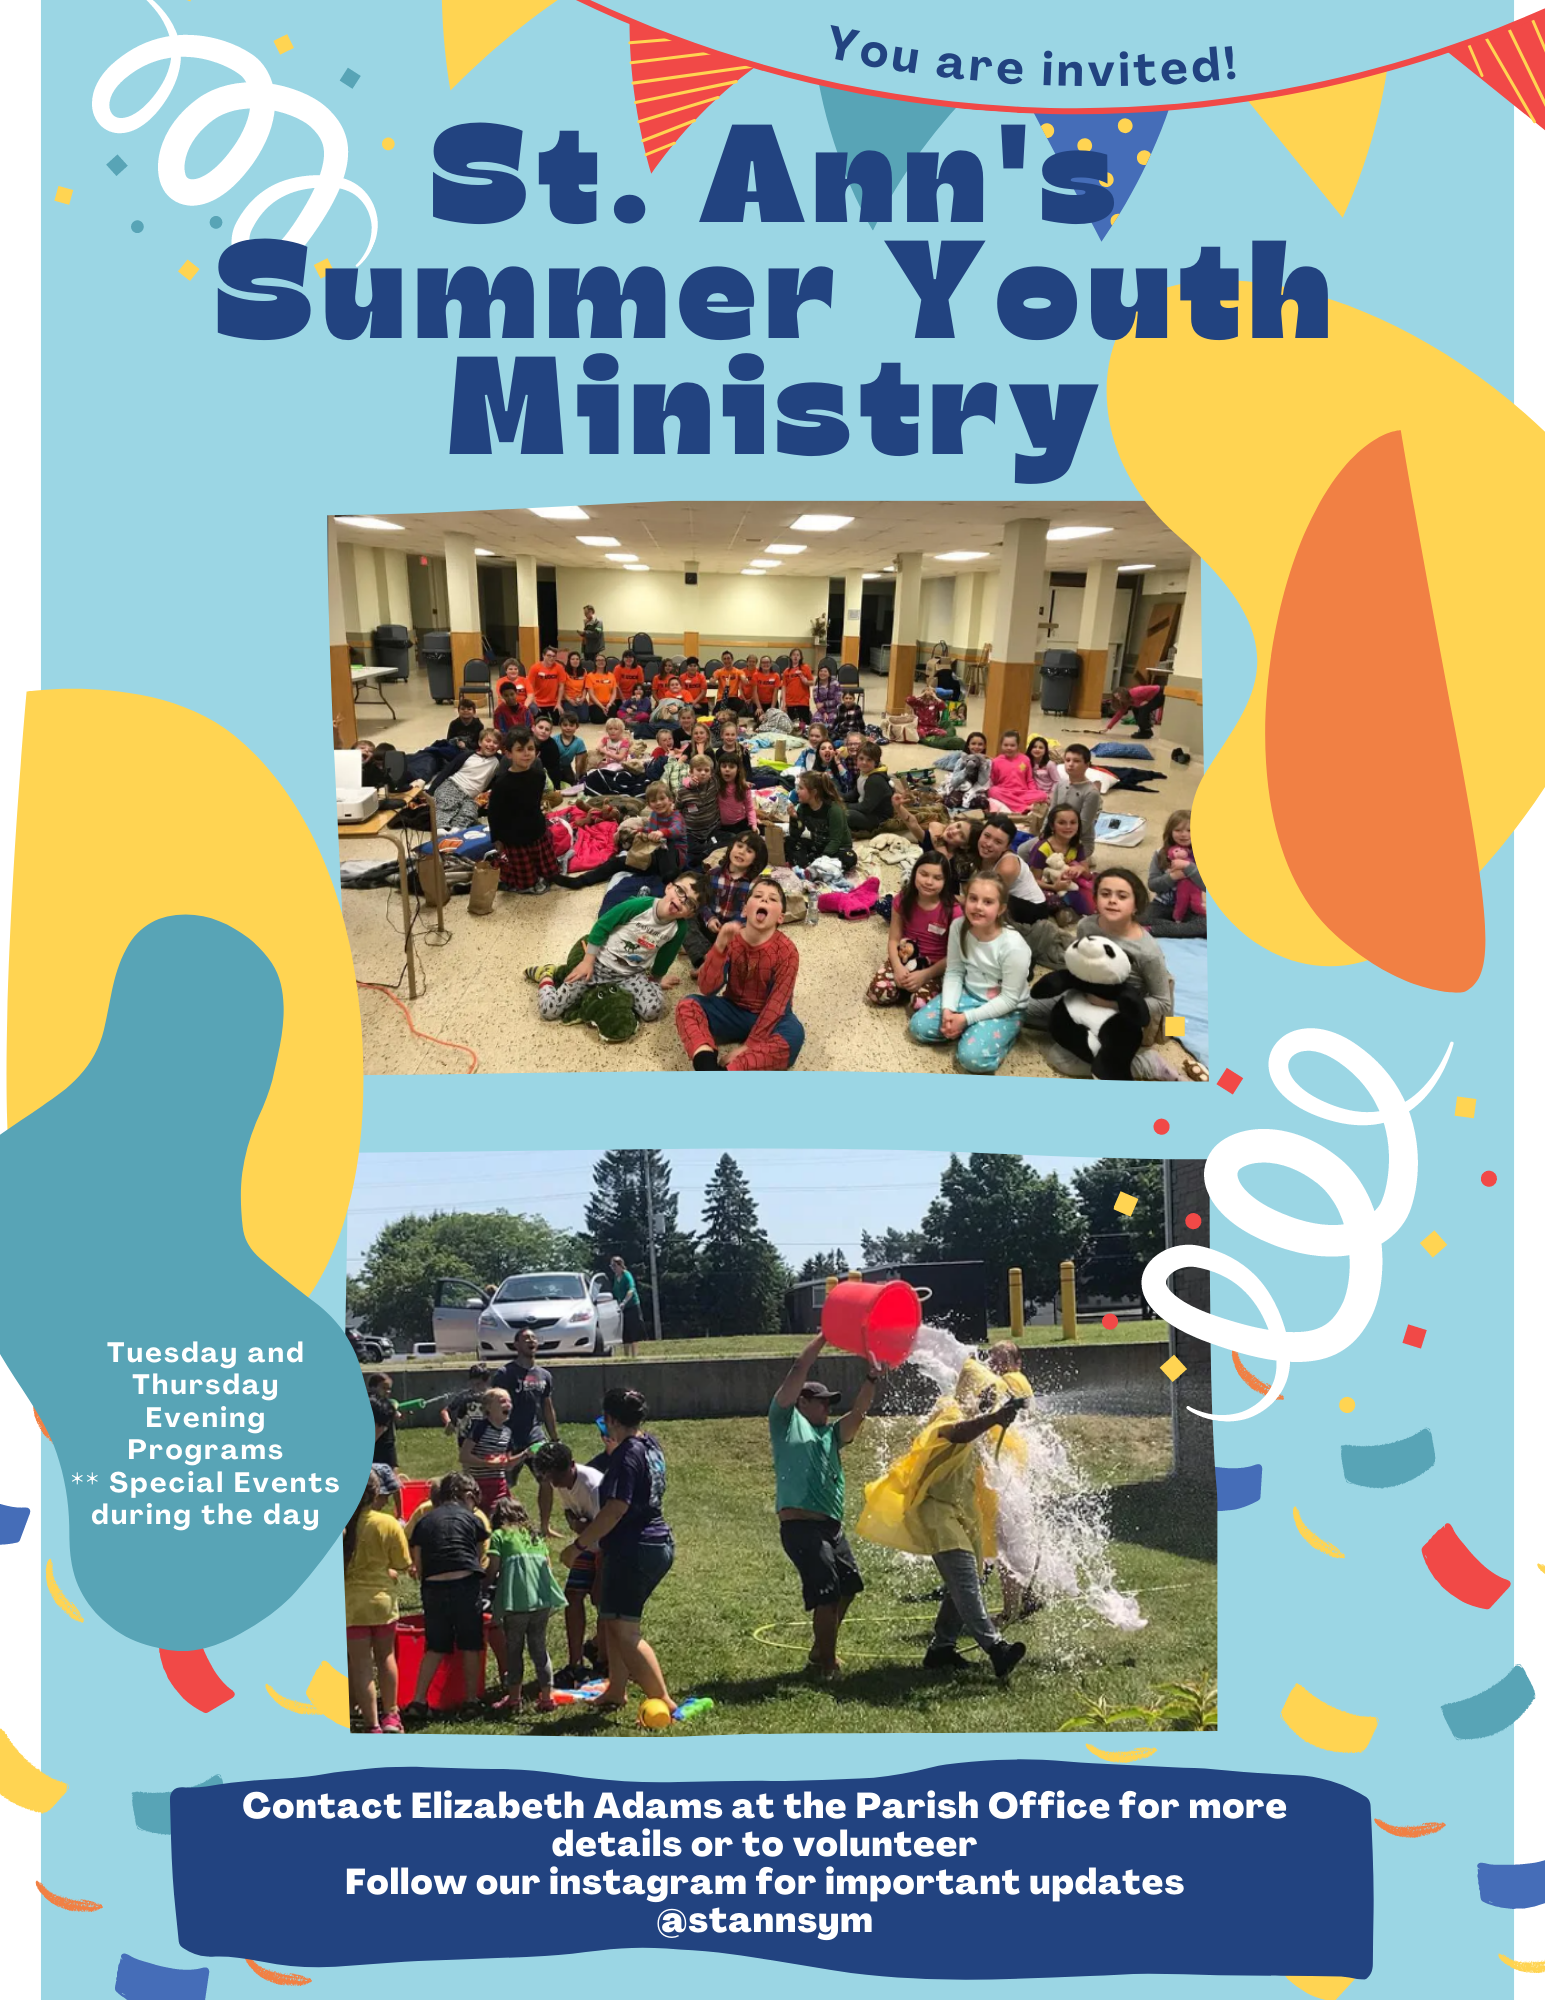 St. Ann's Summer Youth Ministry Poster. Images of past youth minstry events "Tuesday and Thursday Evening Programs **Special events during the day" "Contact Elizabeth Adams at the Parish Office for more details or to volunteer" "Follow our instagram for important updates @stannsym"